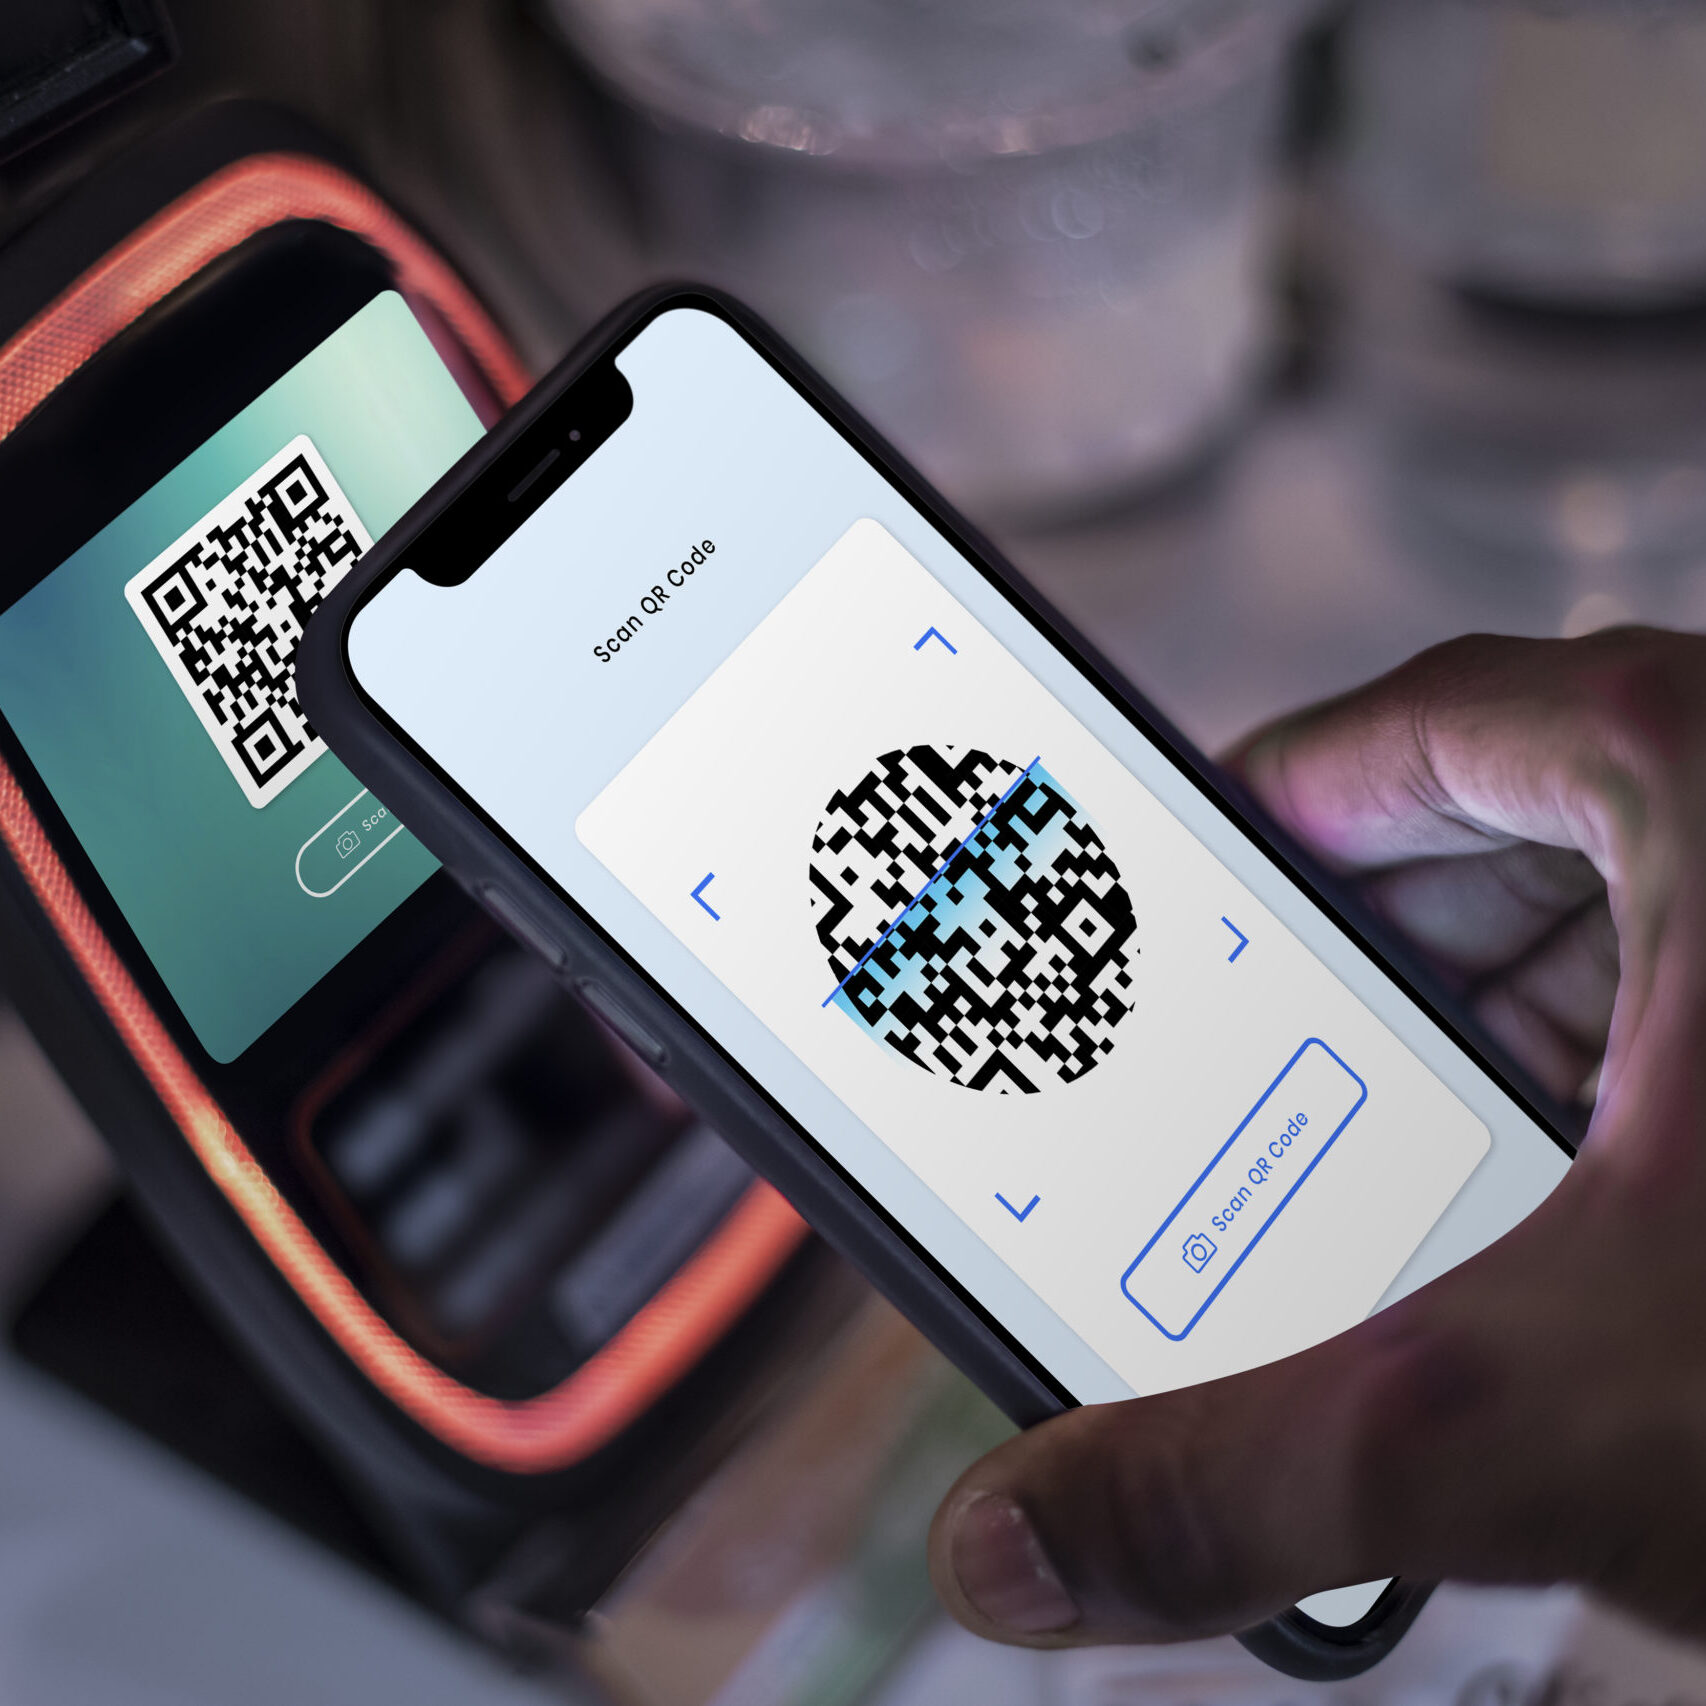 Contactless and cashless payment through qr code and mobile banking